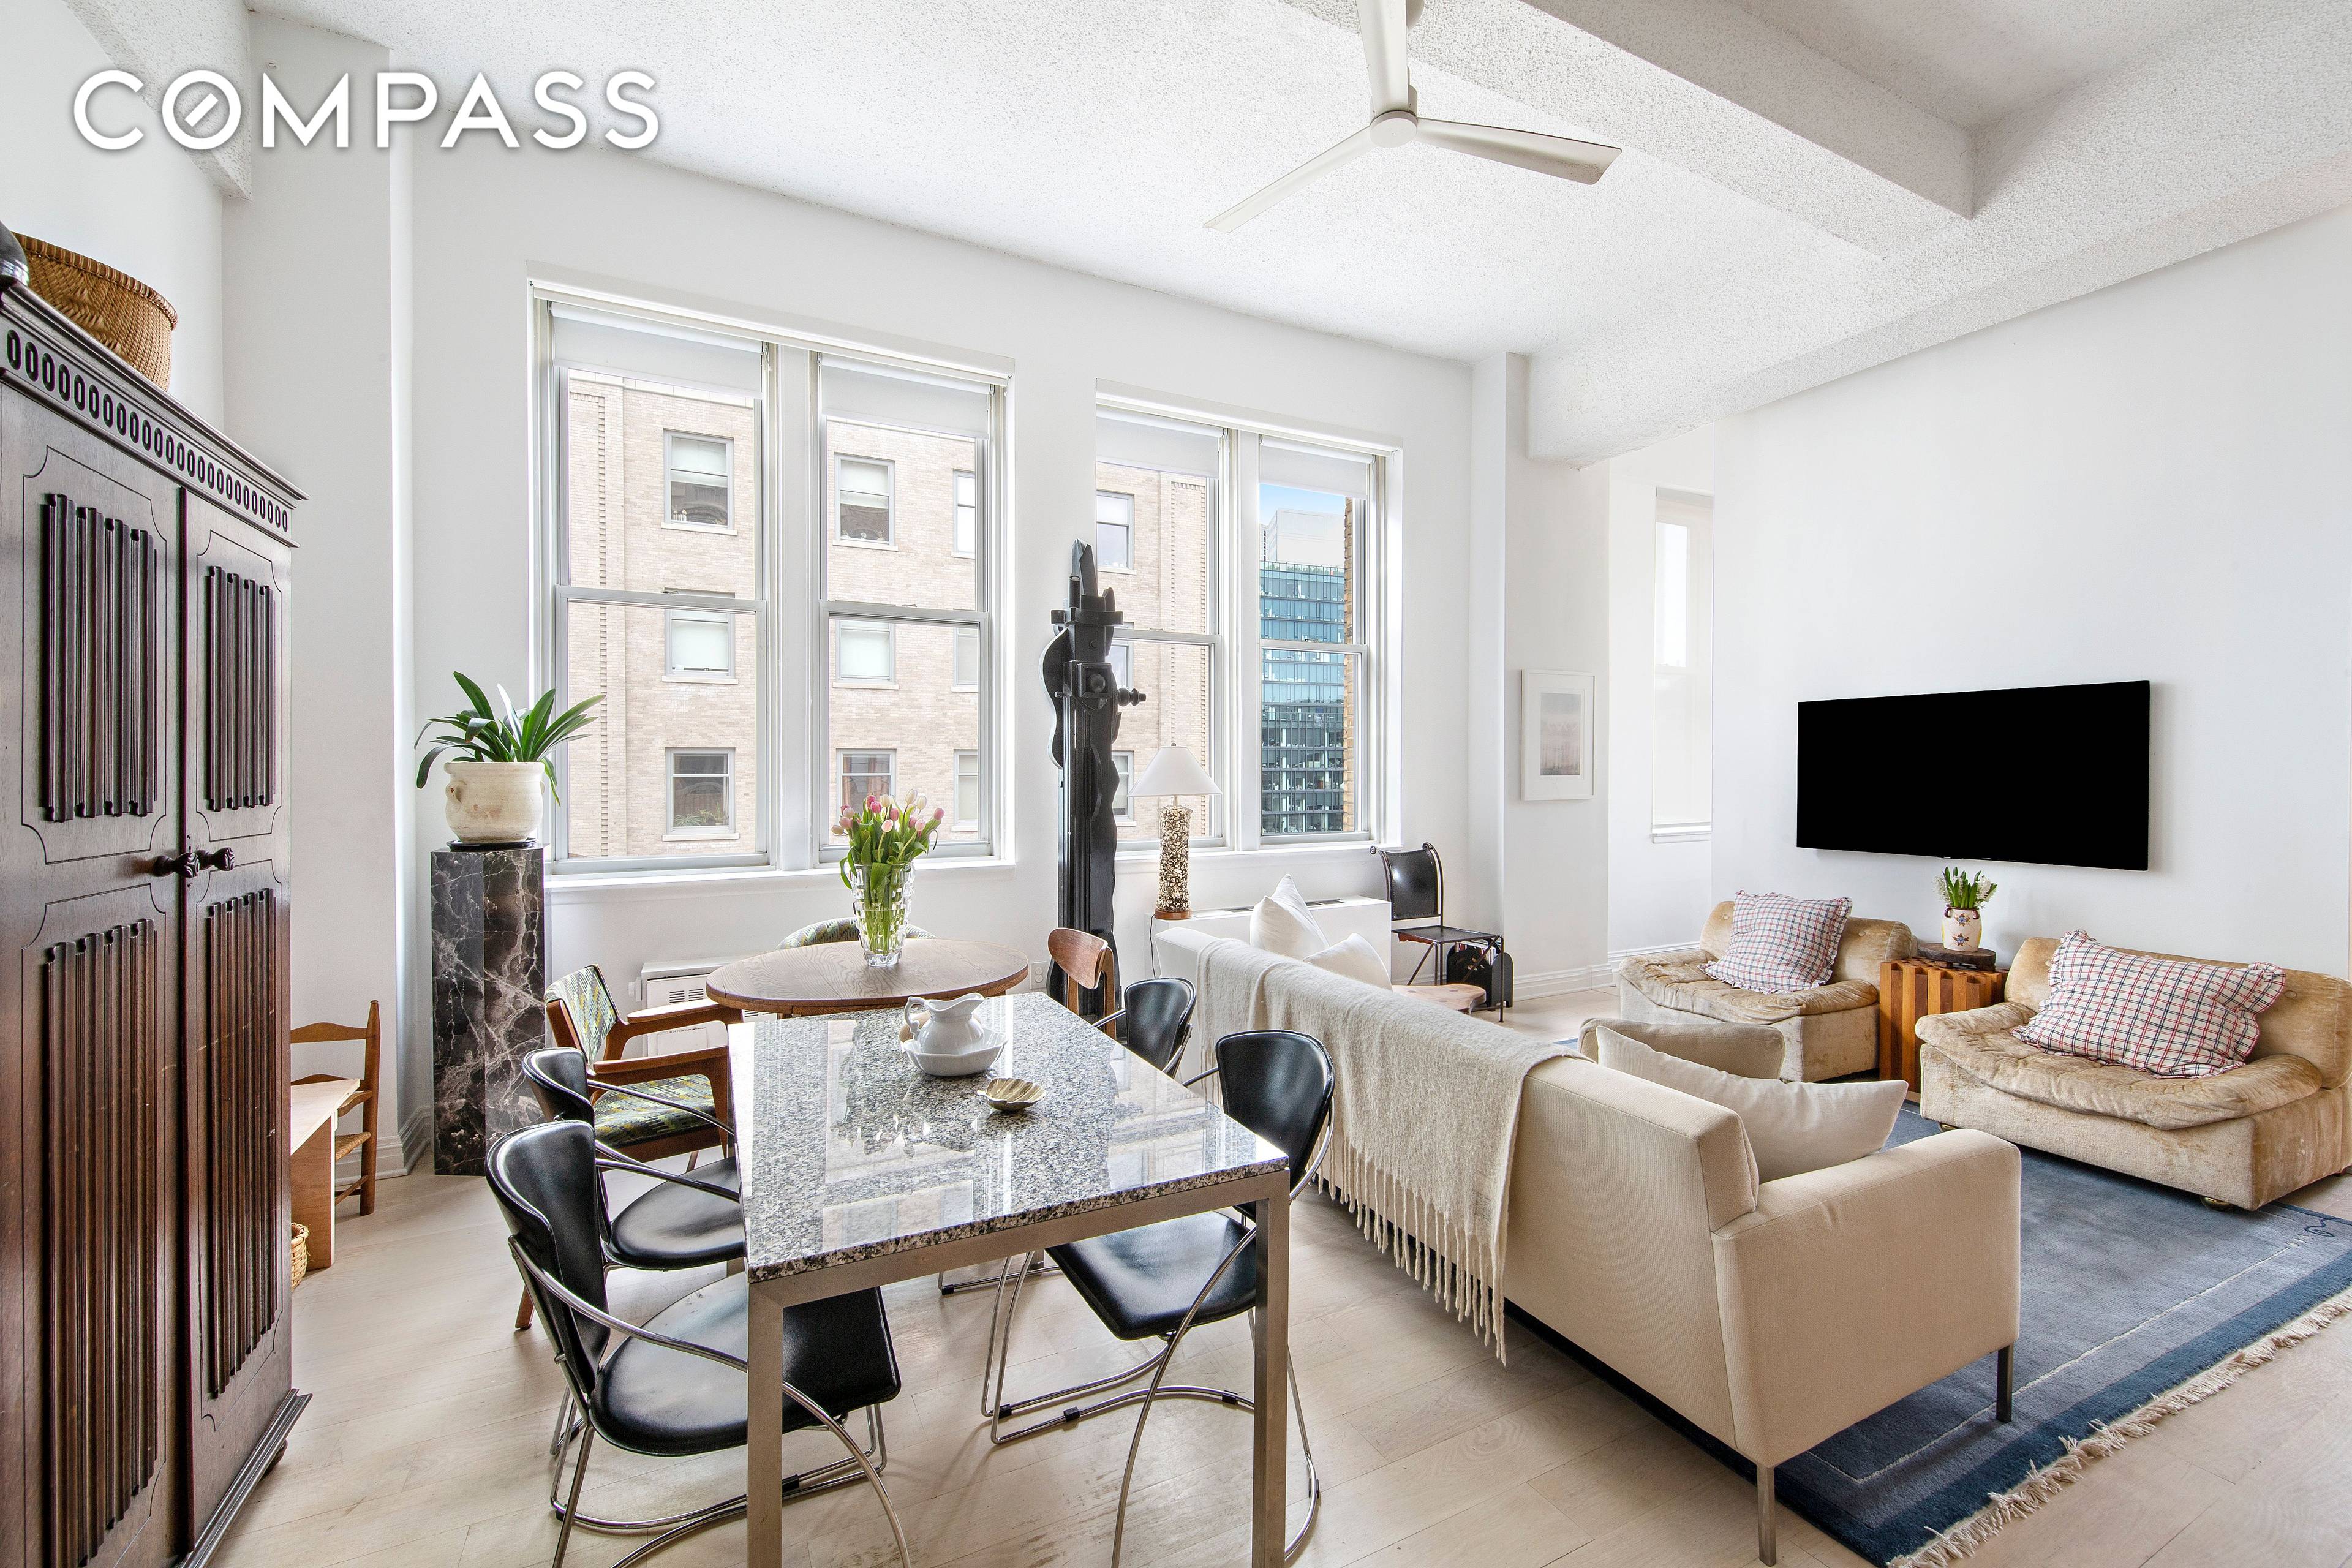 Come see this sophisticated modern one bedroom turned into a loft for open floor plan, Coop corner unit situated at the ideal crossroads of Boerum Hill, Brooklyn Heights and Downtown ...